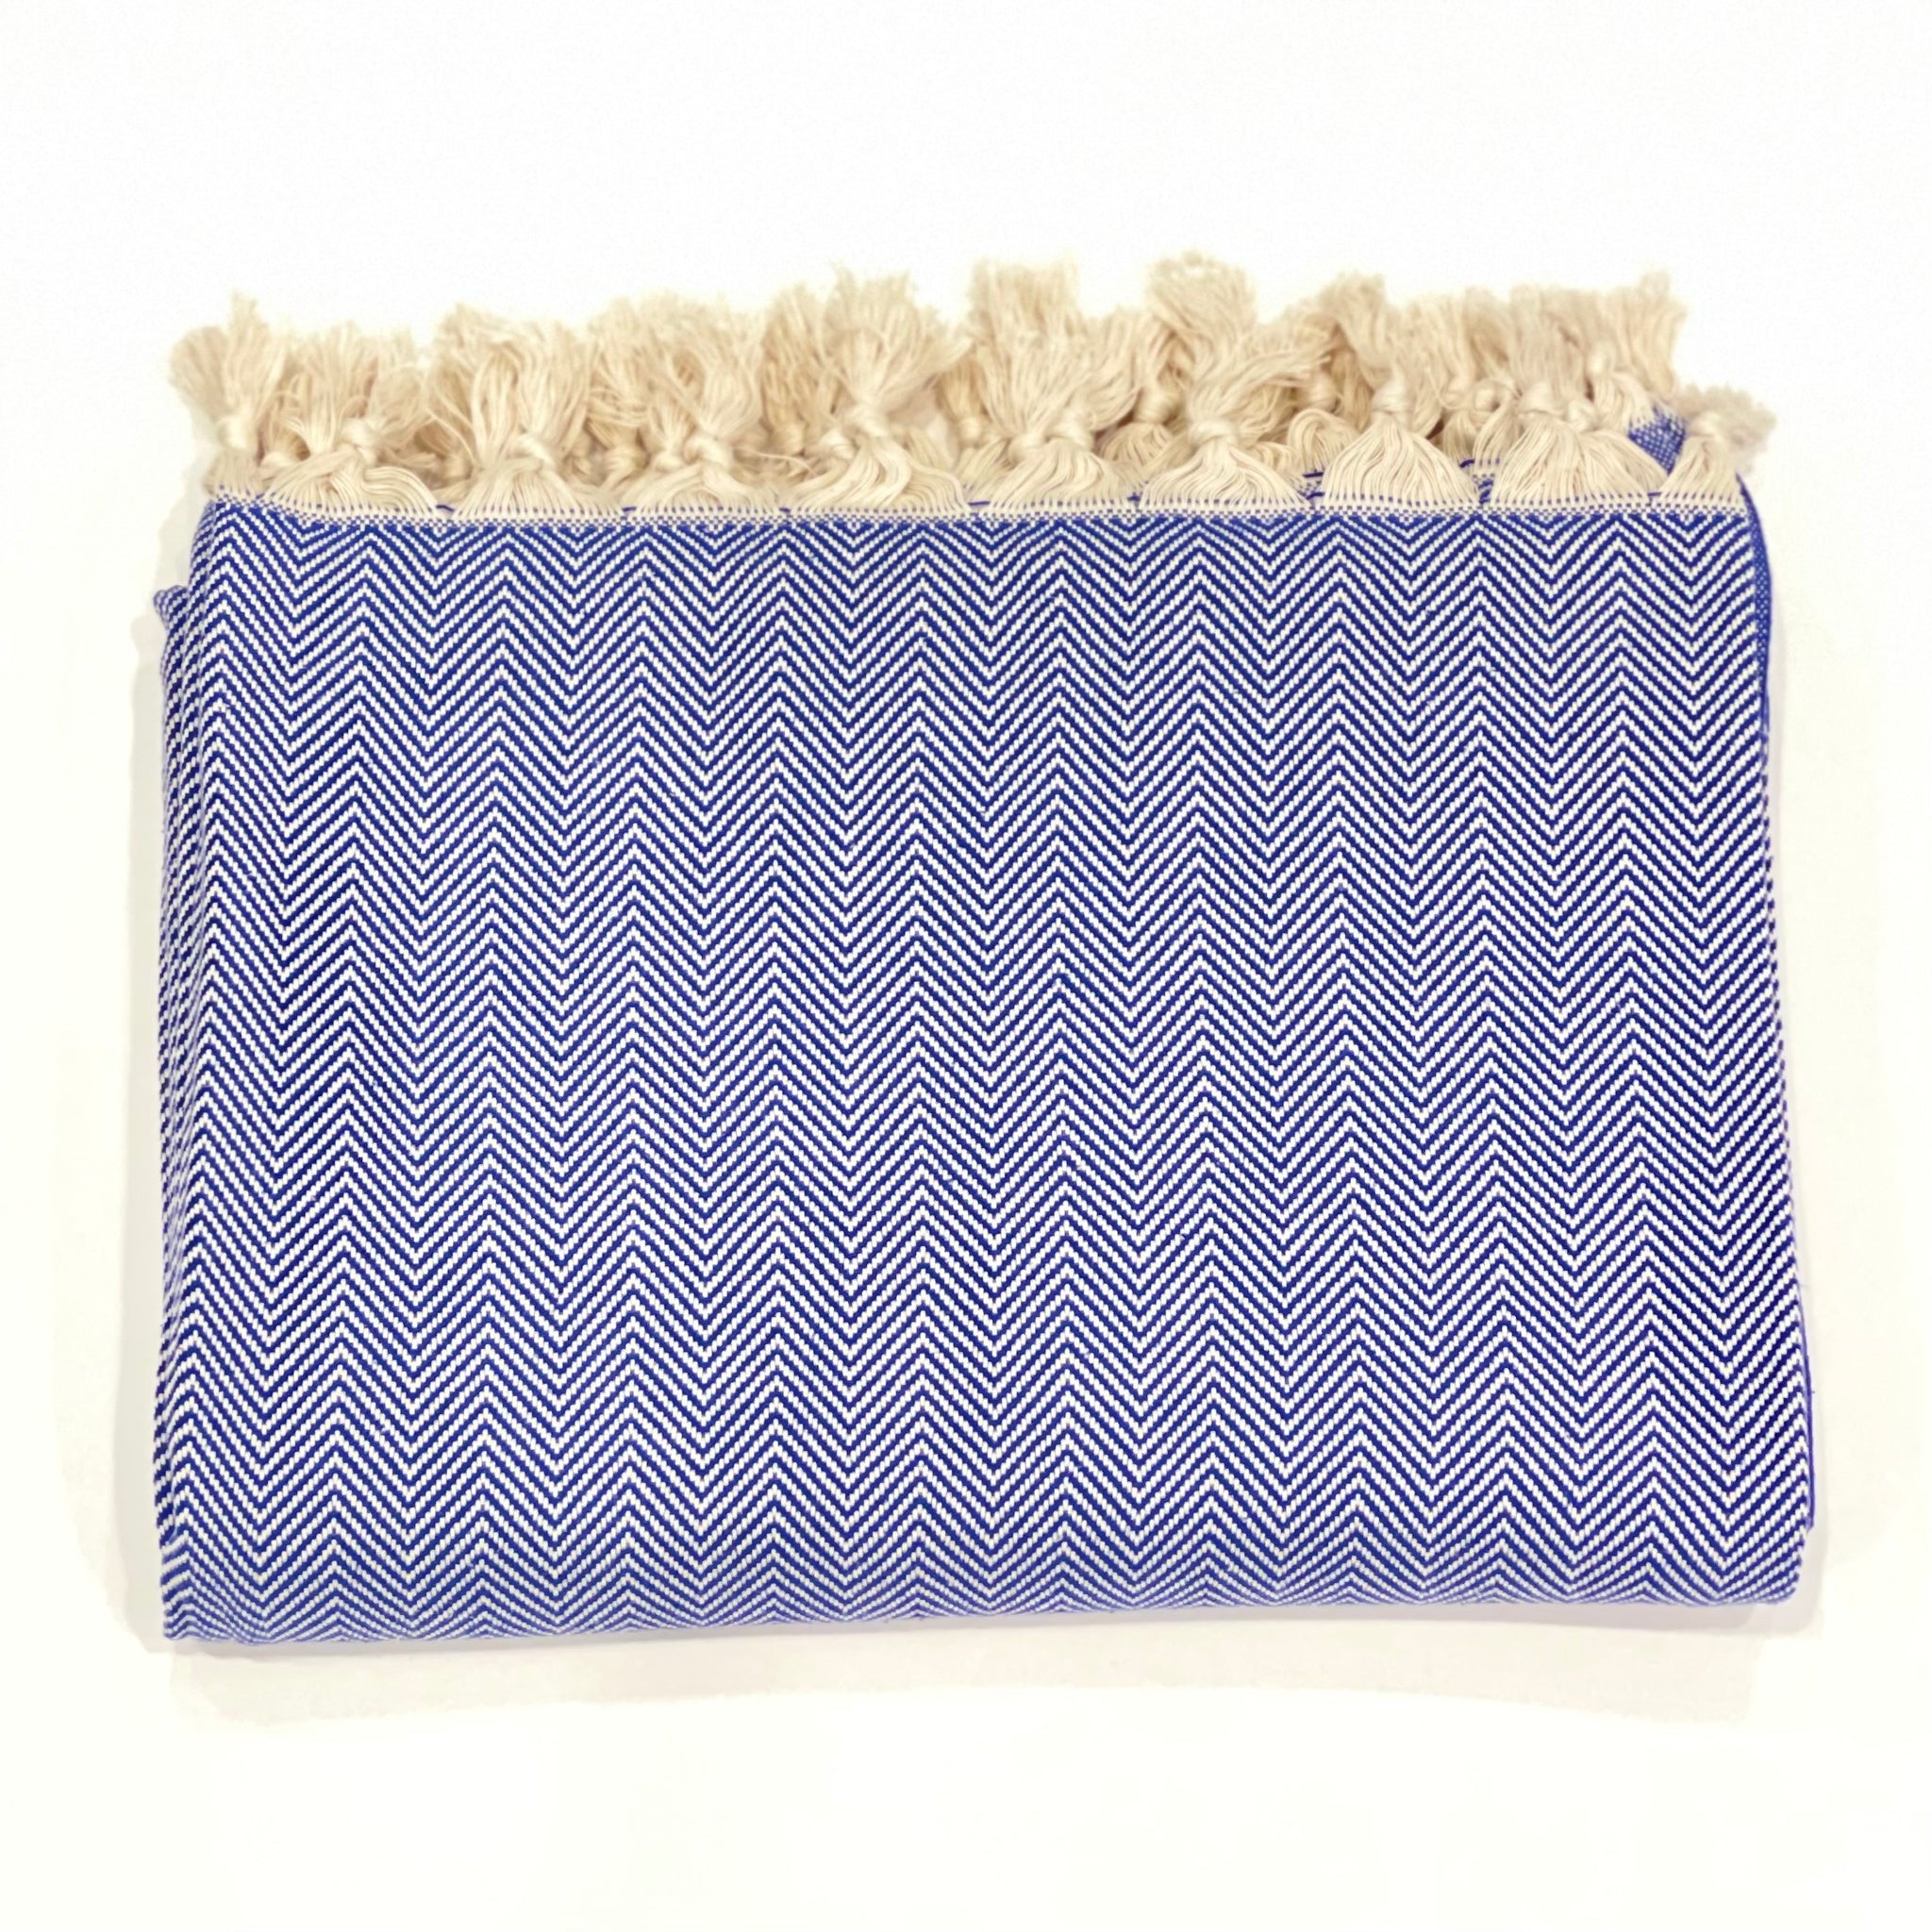 This beautiful throw blanket is hand loomed in a true blue herringbone pattern with 100% Turkish Cotton. Known for its softness, comfort, light weight, hypoallergenic, and antimicrobial properties. Can be used as a throw blanket on a bed, couch, picnic, or even at the beach! Get ready to stay warm and comfy! Fair trade. Measure 71"x 94.5". XL King size. Perfect snuggle on the couch!